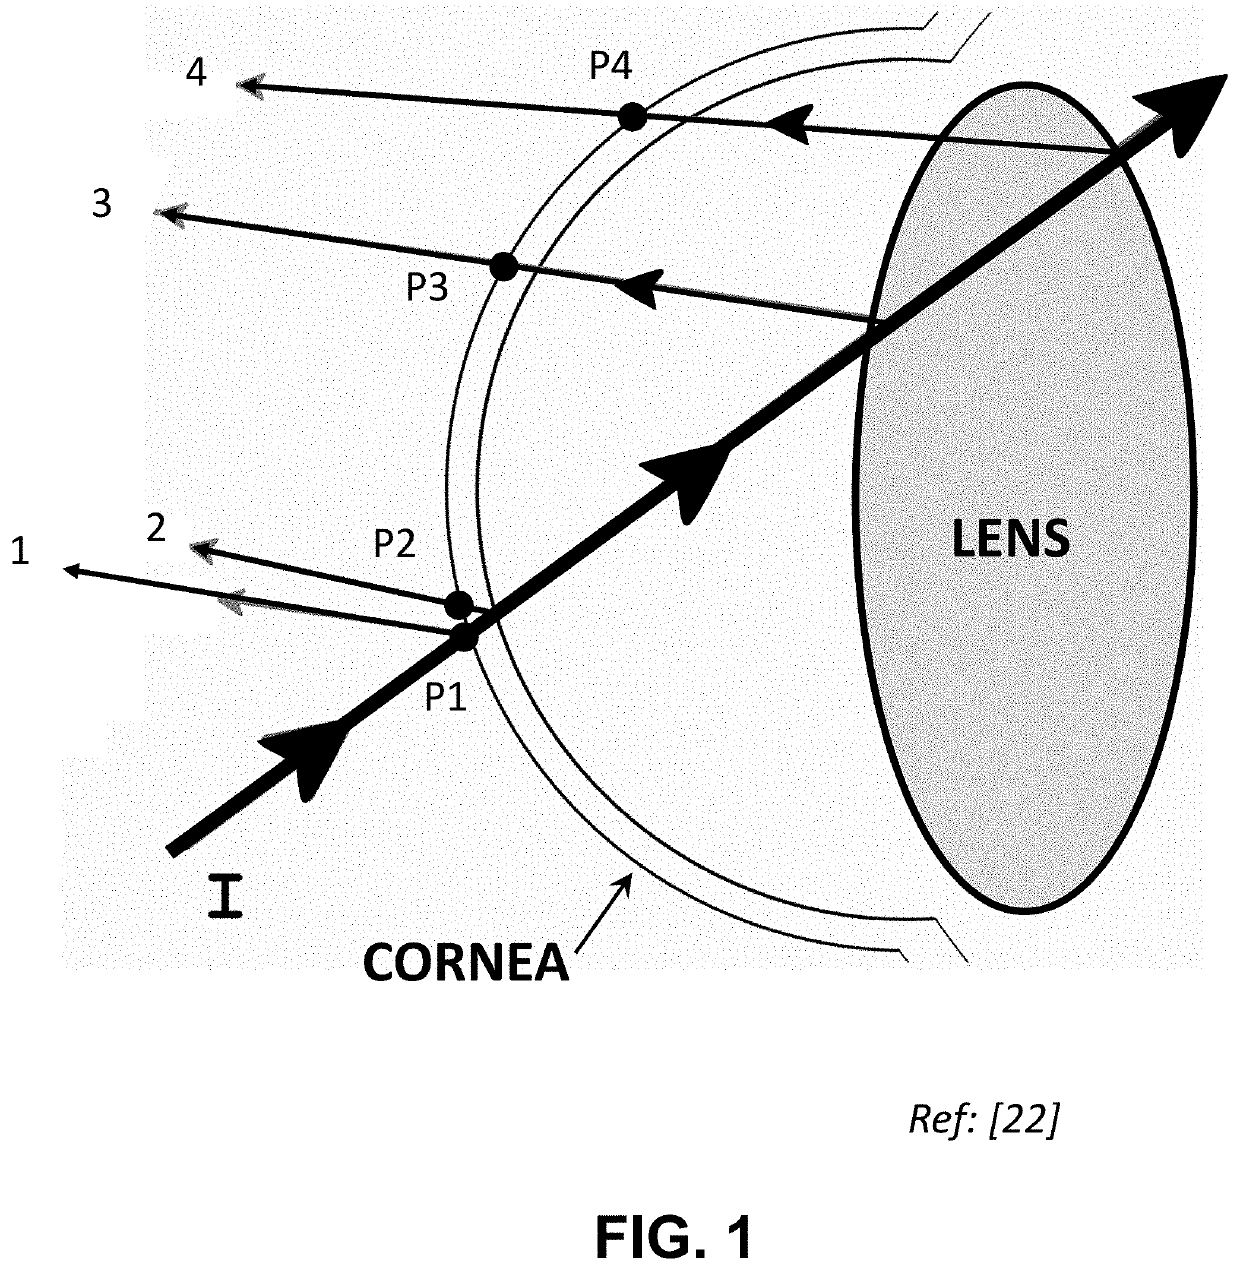 System and Methods for Dynamic Position Measurement of Ocular Structures